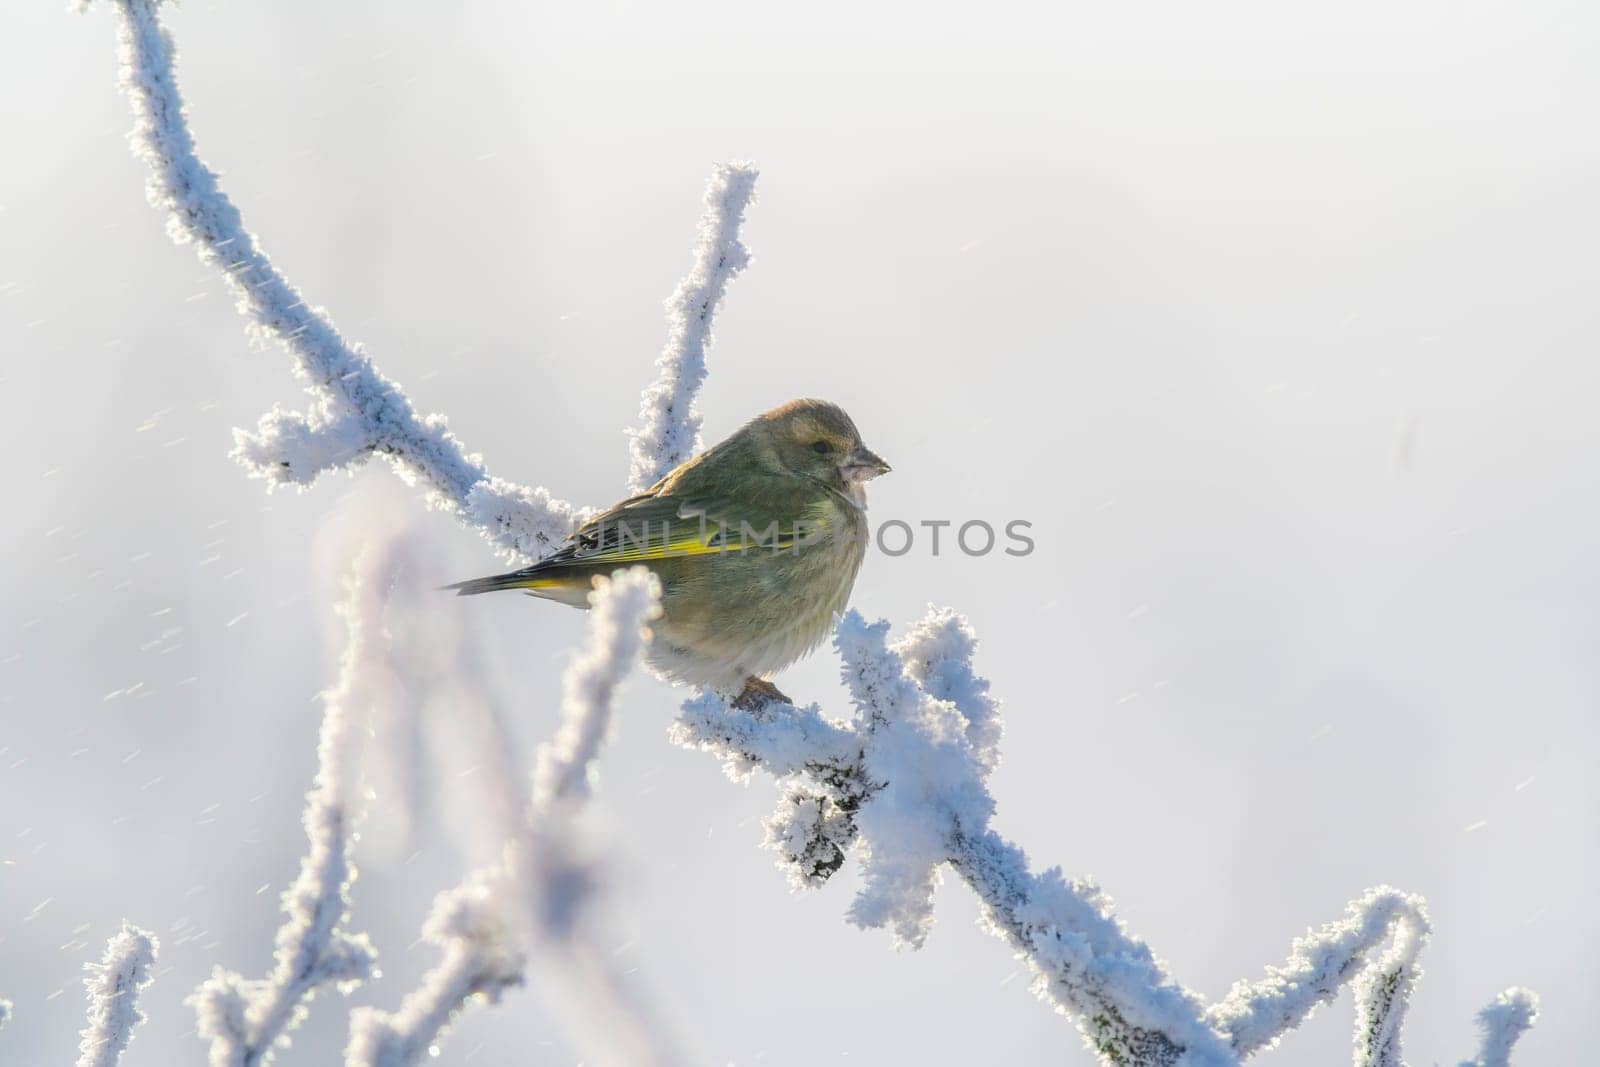 greenfinch sits on a snowy branch in the cold winter